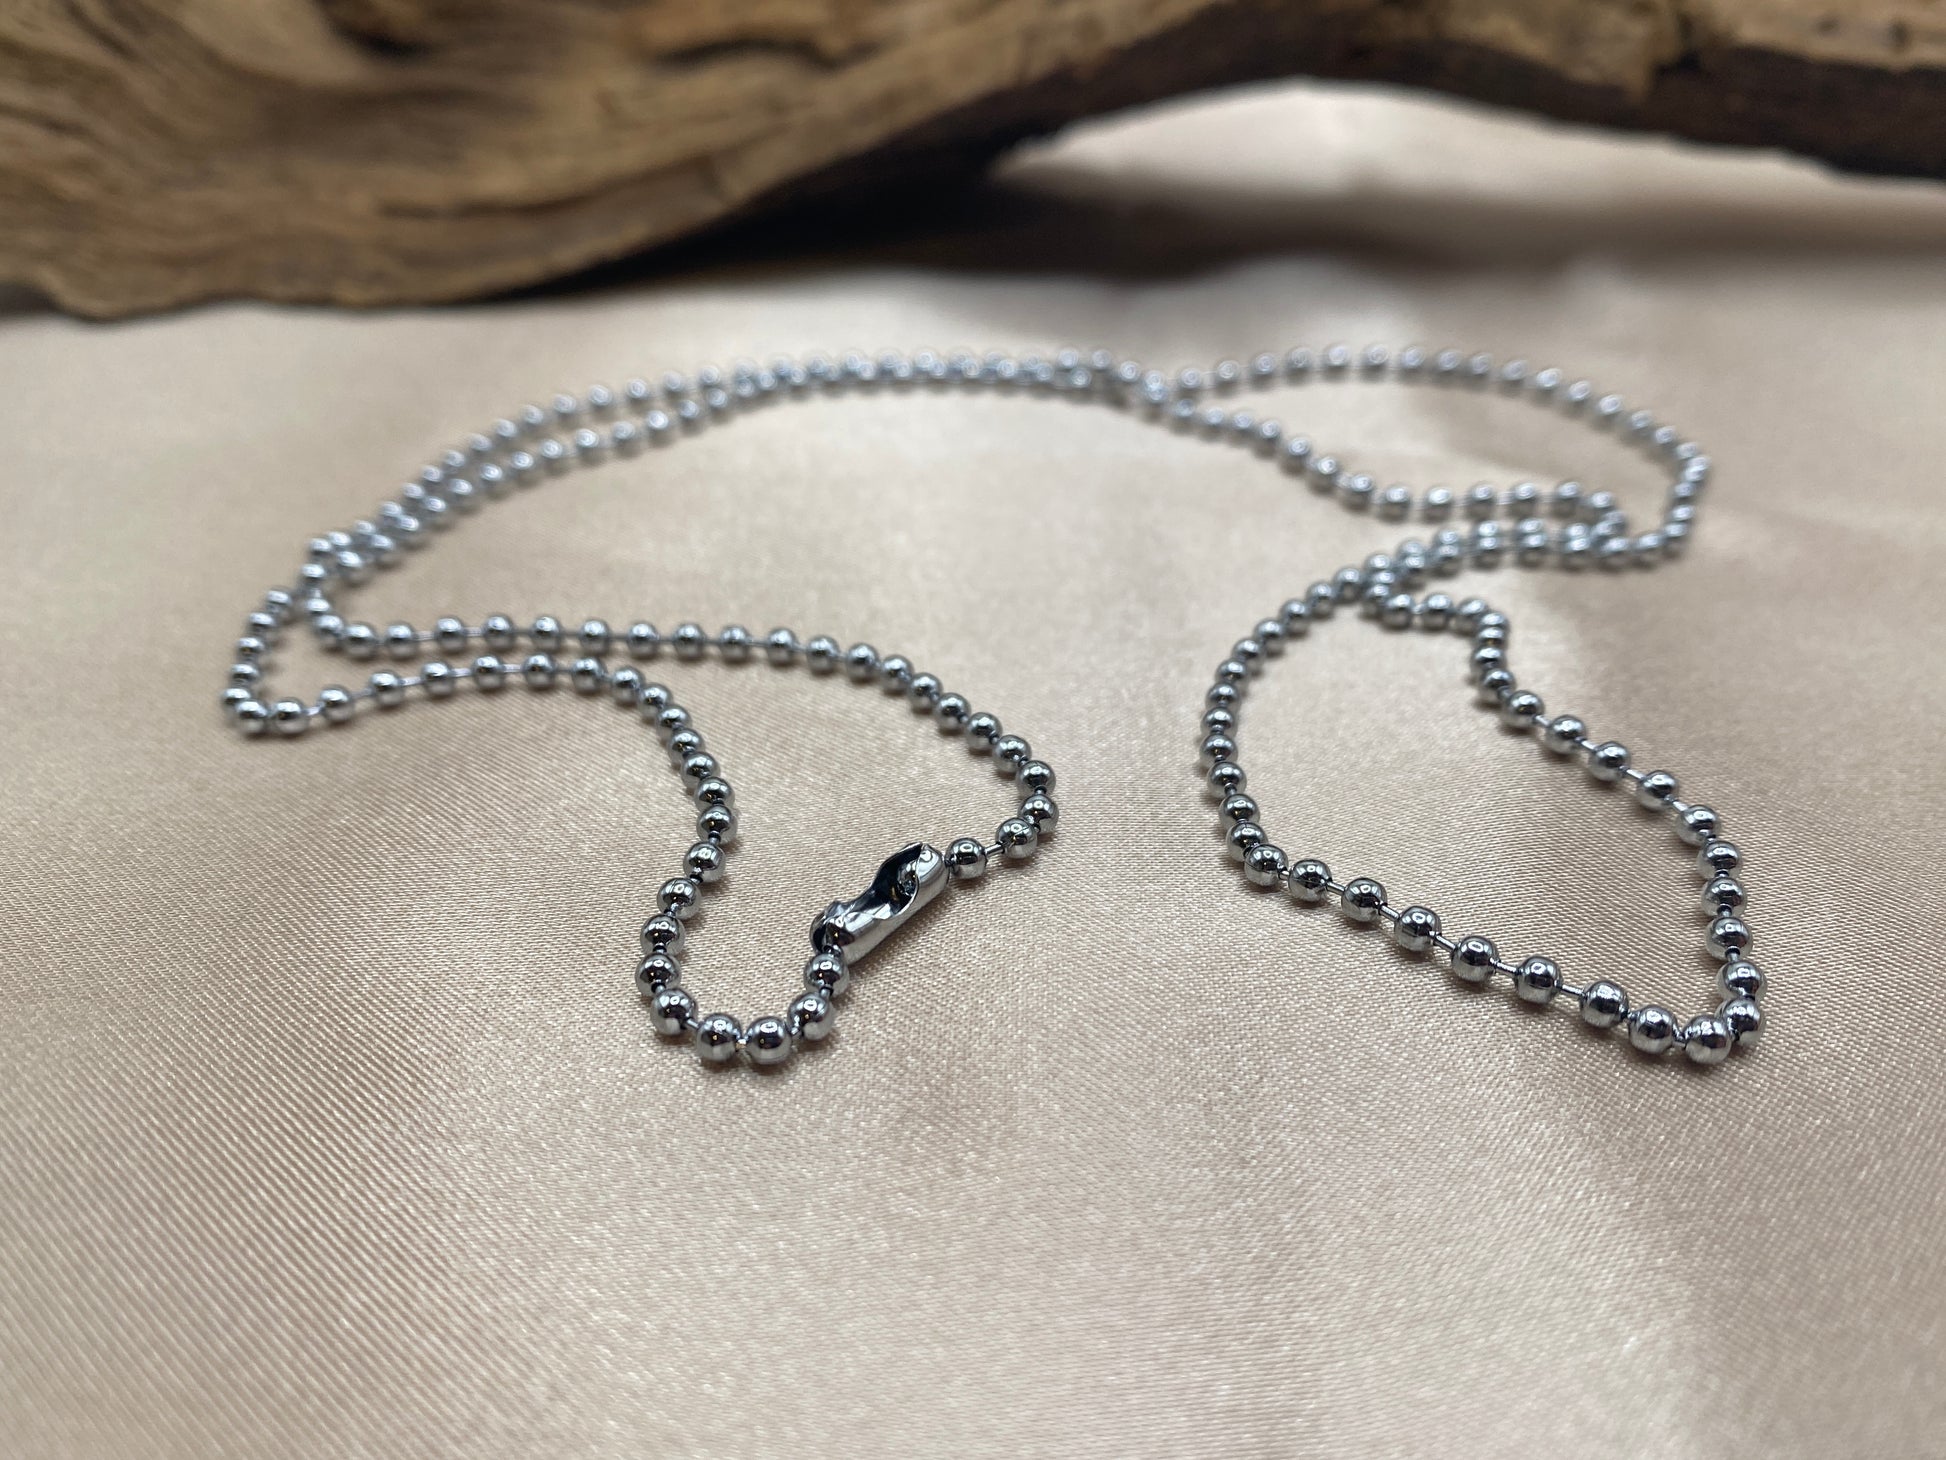 Stainless steel ball chain